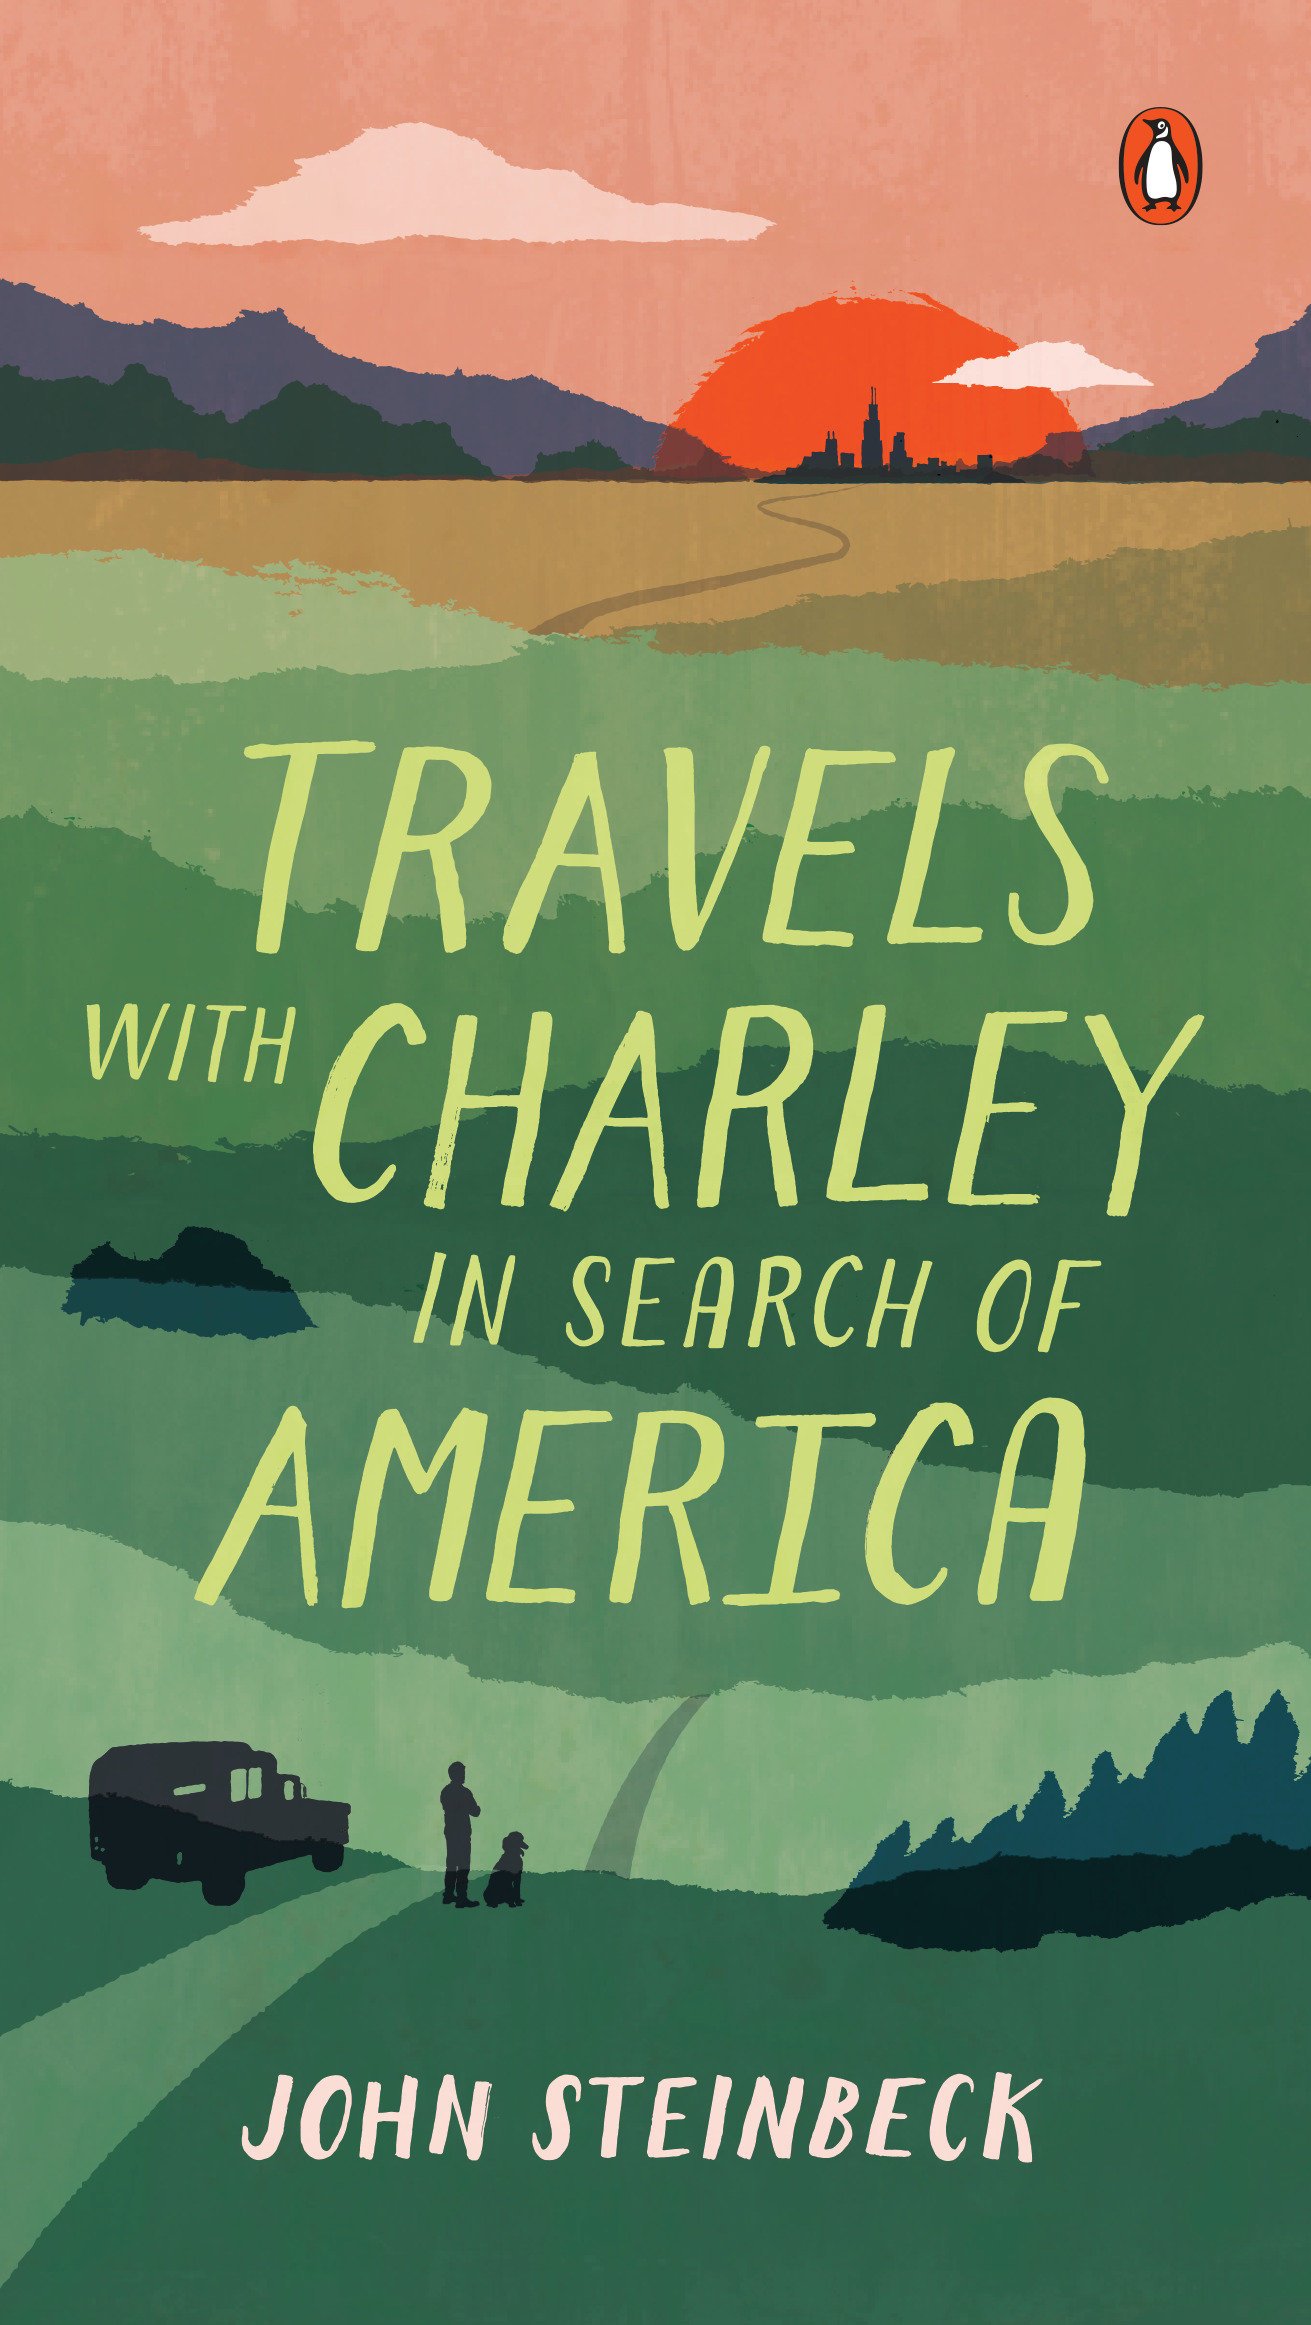 A book cover illustration for "travels with charley in search of america" by john steinbeck, featuring a picturesque landscape at sunset with a camper van, a person, and a dog.